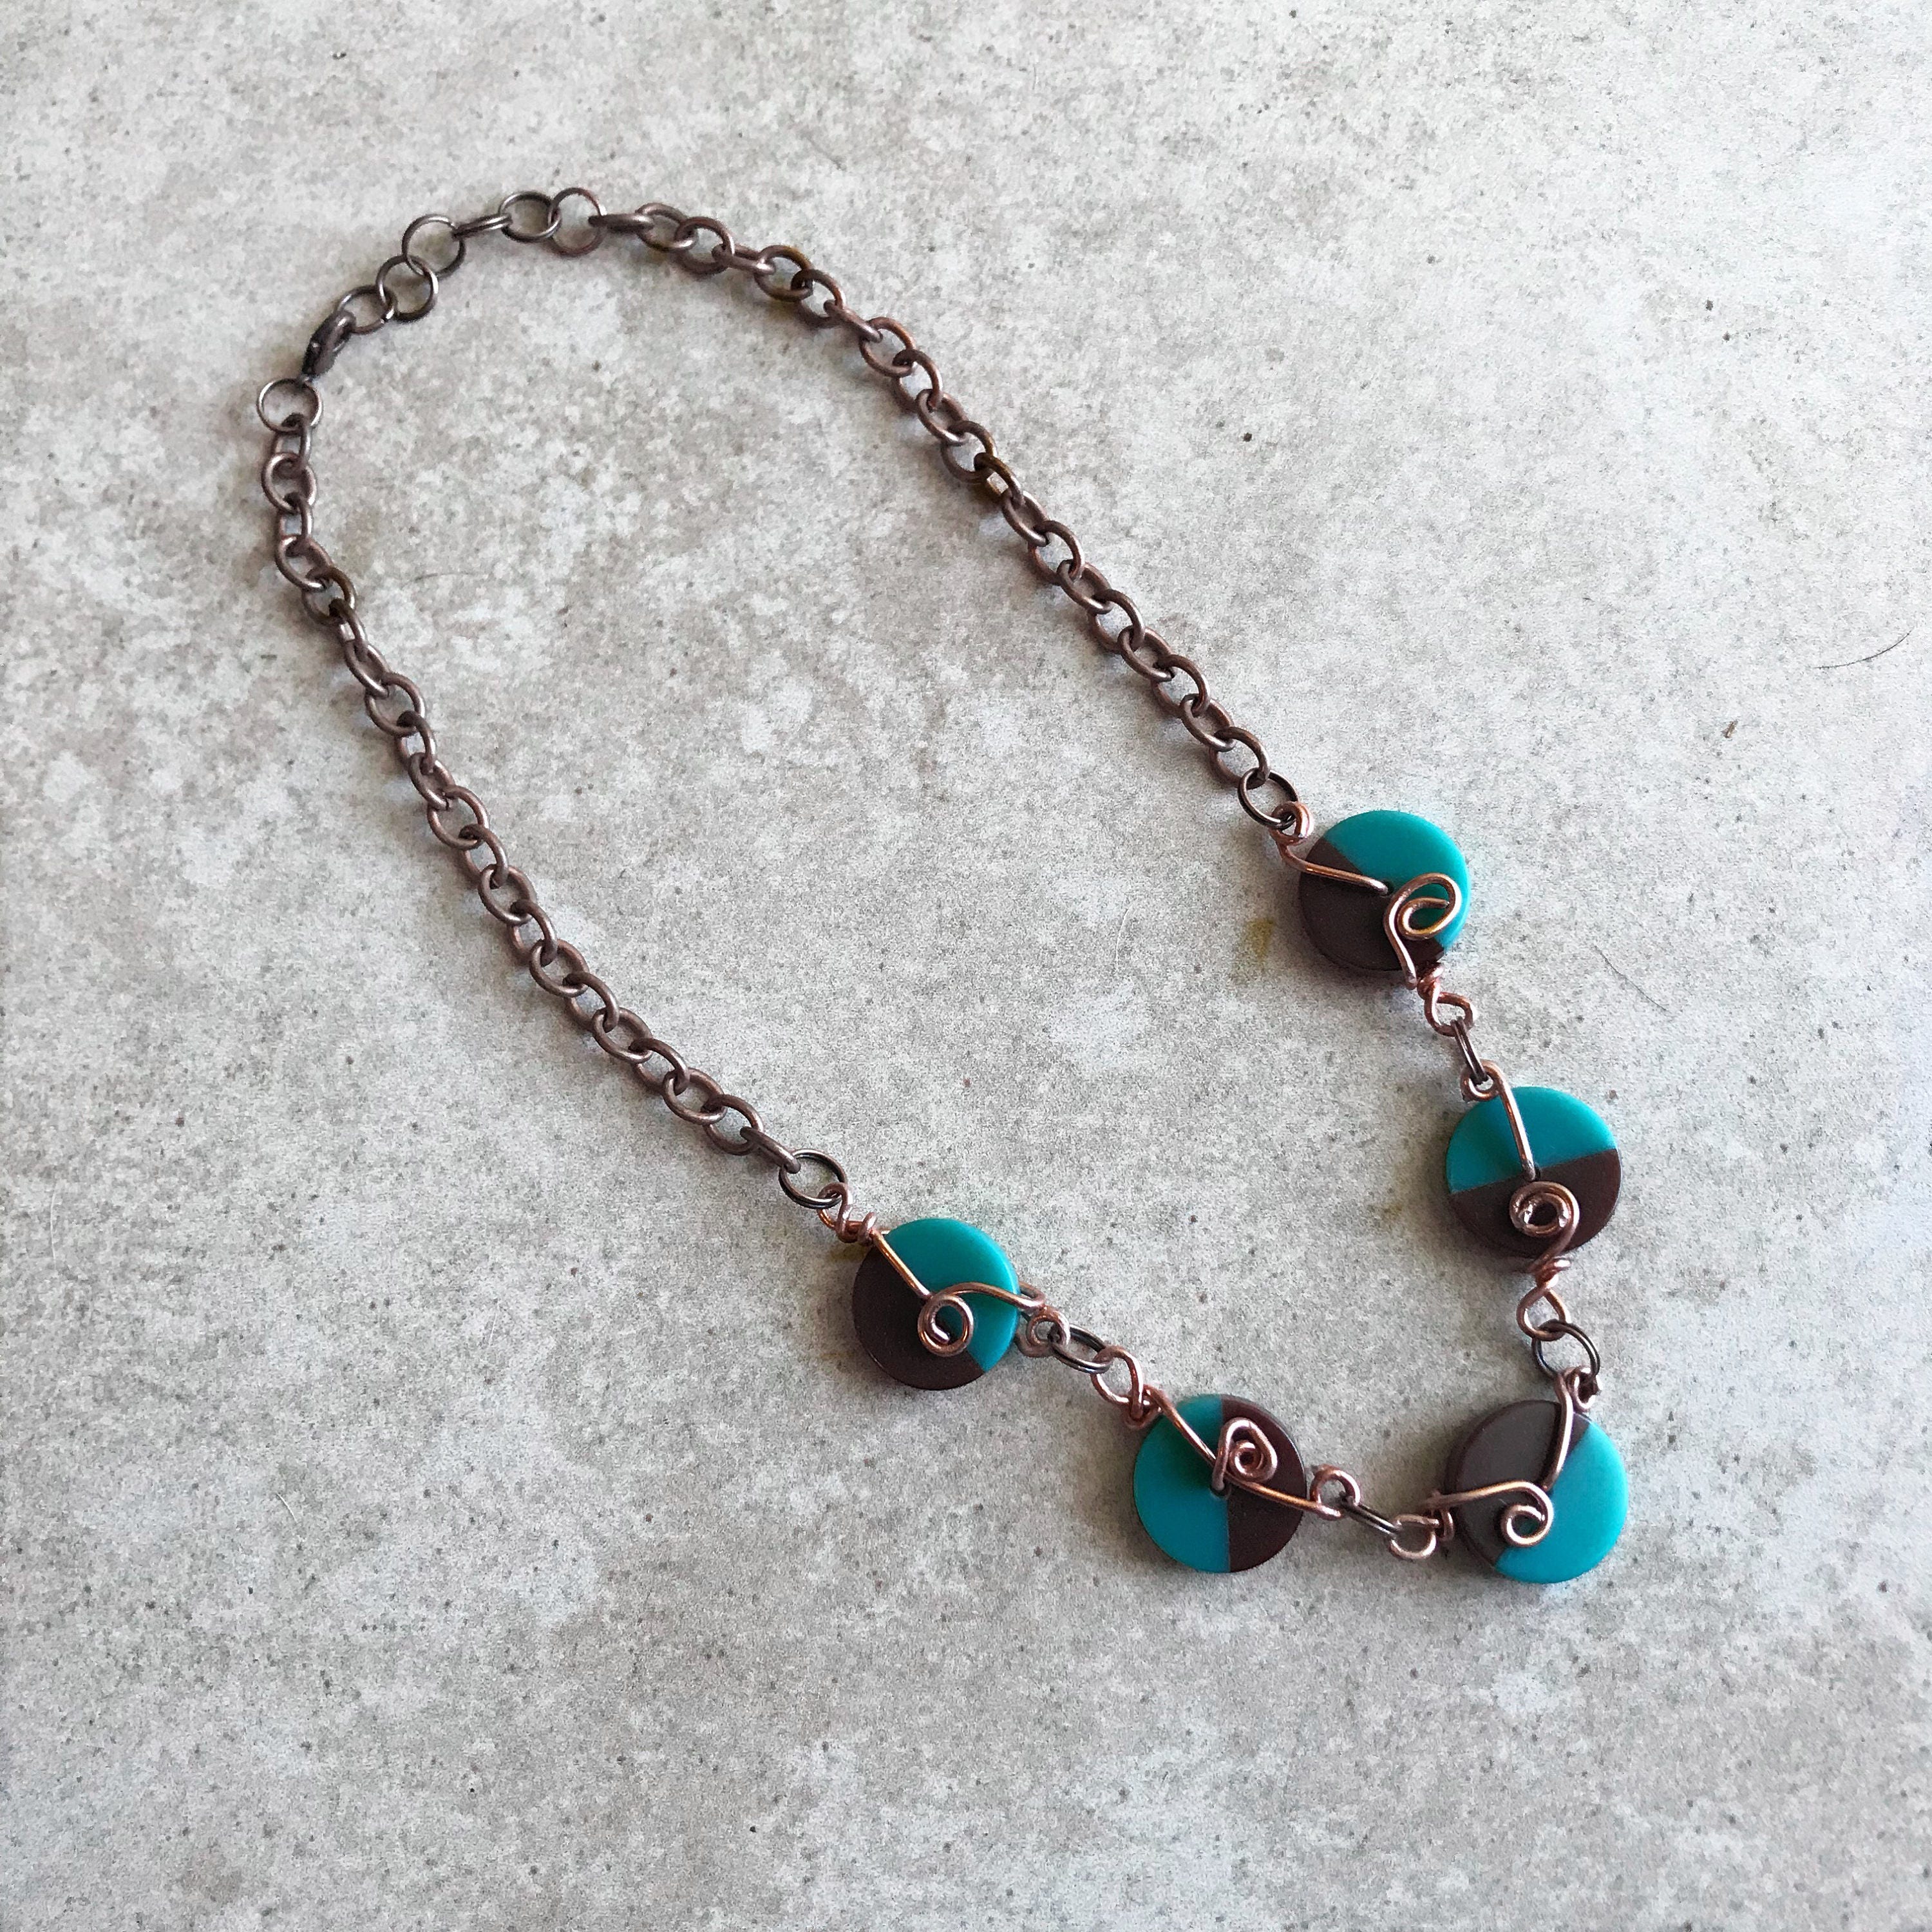 Wire Wrapped Necklace and Earring Set With Teal and Blue Beads ...